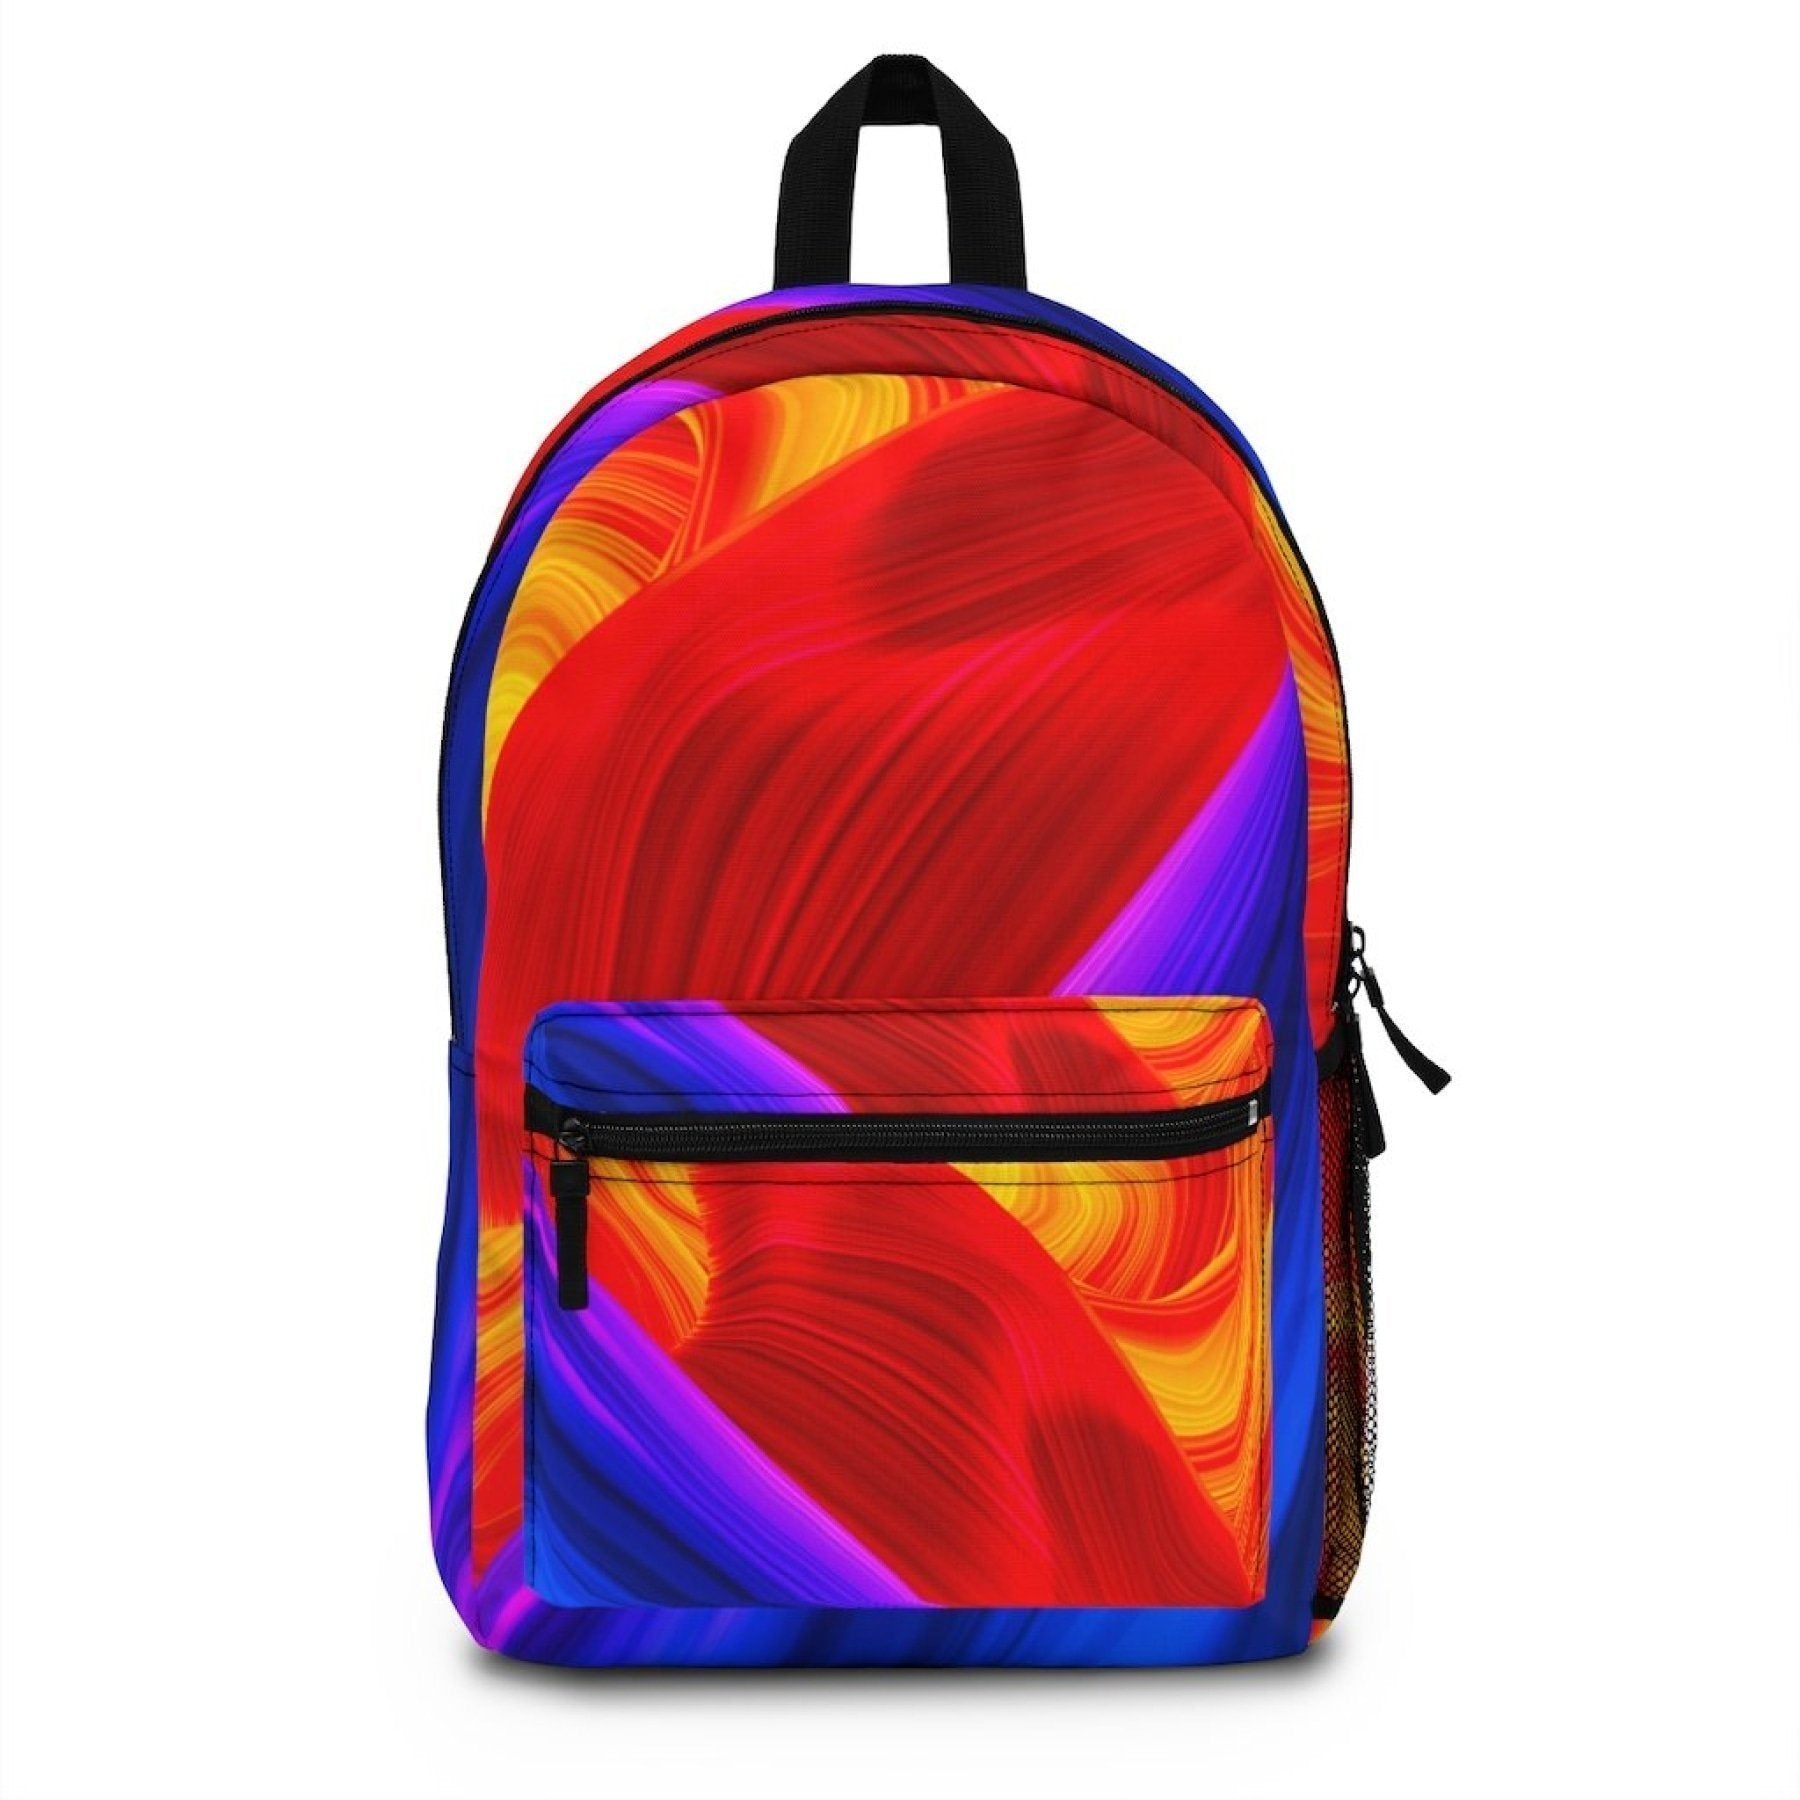 A Canvas Double Shoulder Strap Colorful Swirl Design backpack featuring a swirling pattern of red and yellow with blue accents, standing against a plain white background.